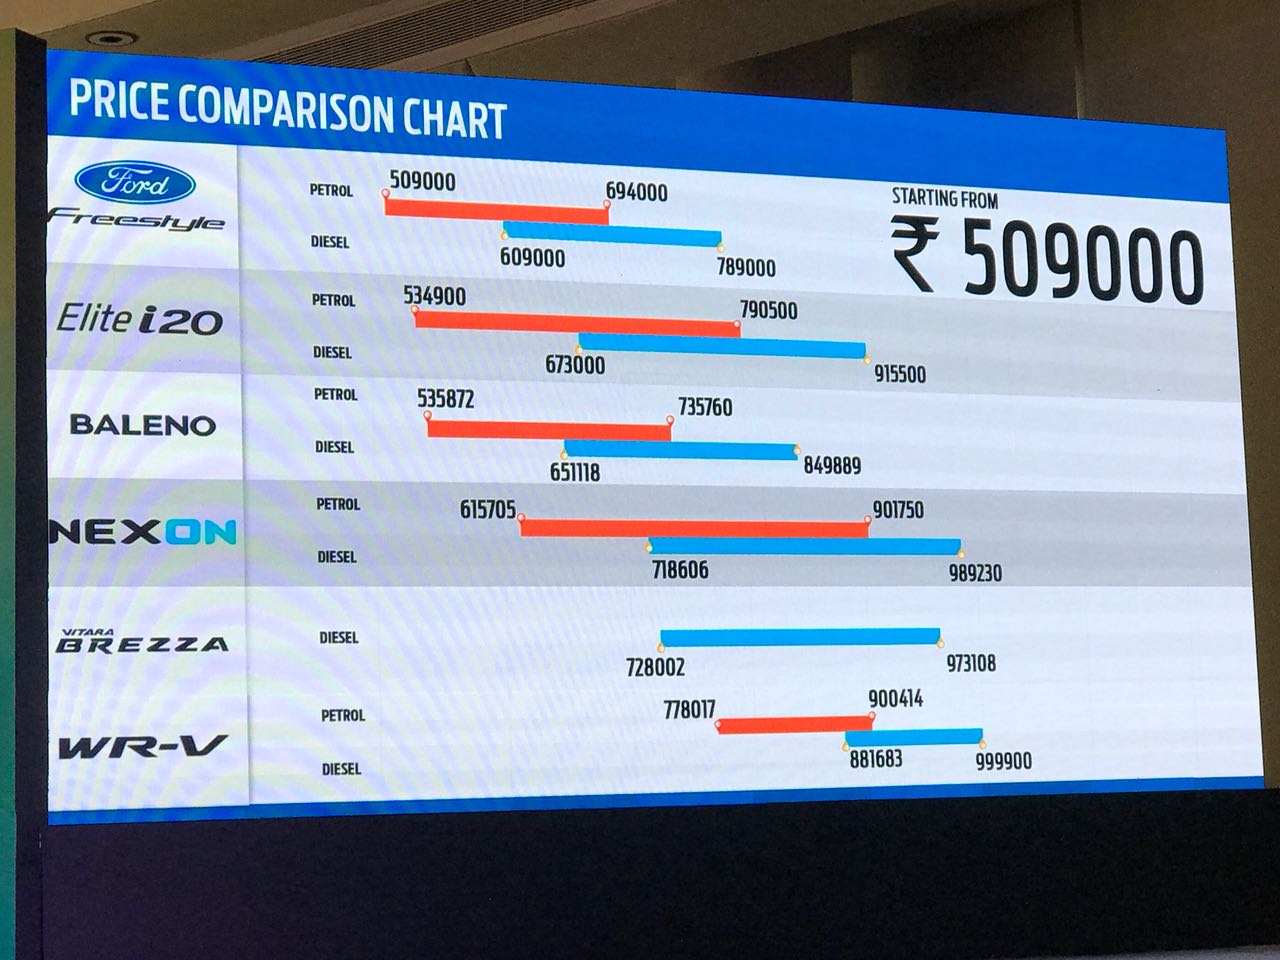 <p>Here is how the Ford Freestyle compares in price to its competition including the Hyundai Elite i20&nbsp;and the Maruti Suzuki Baleno</p>